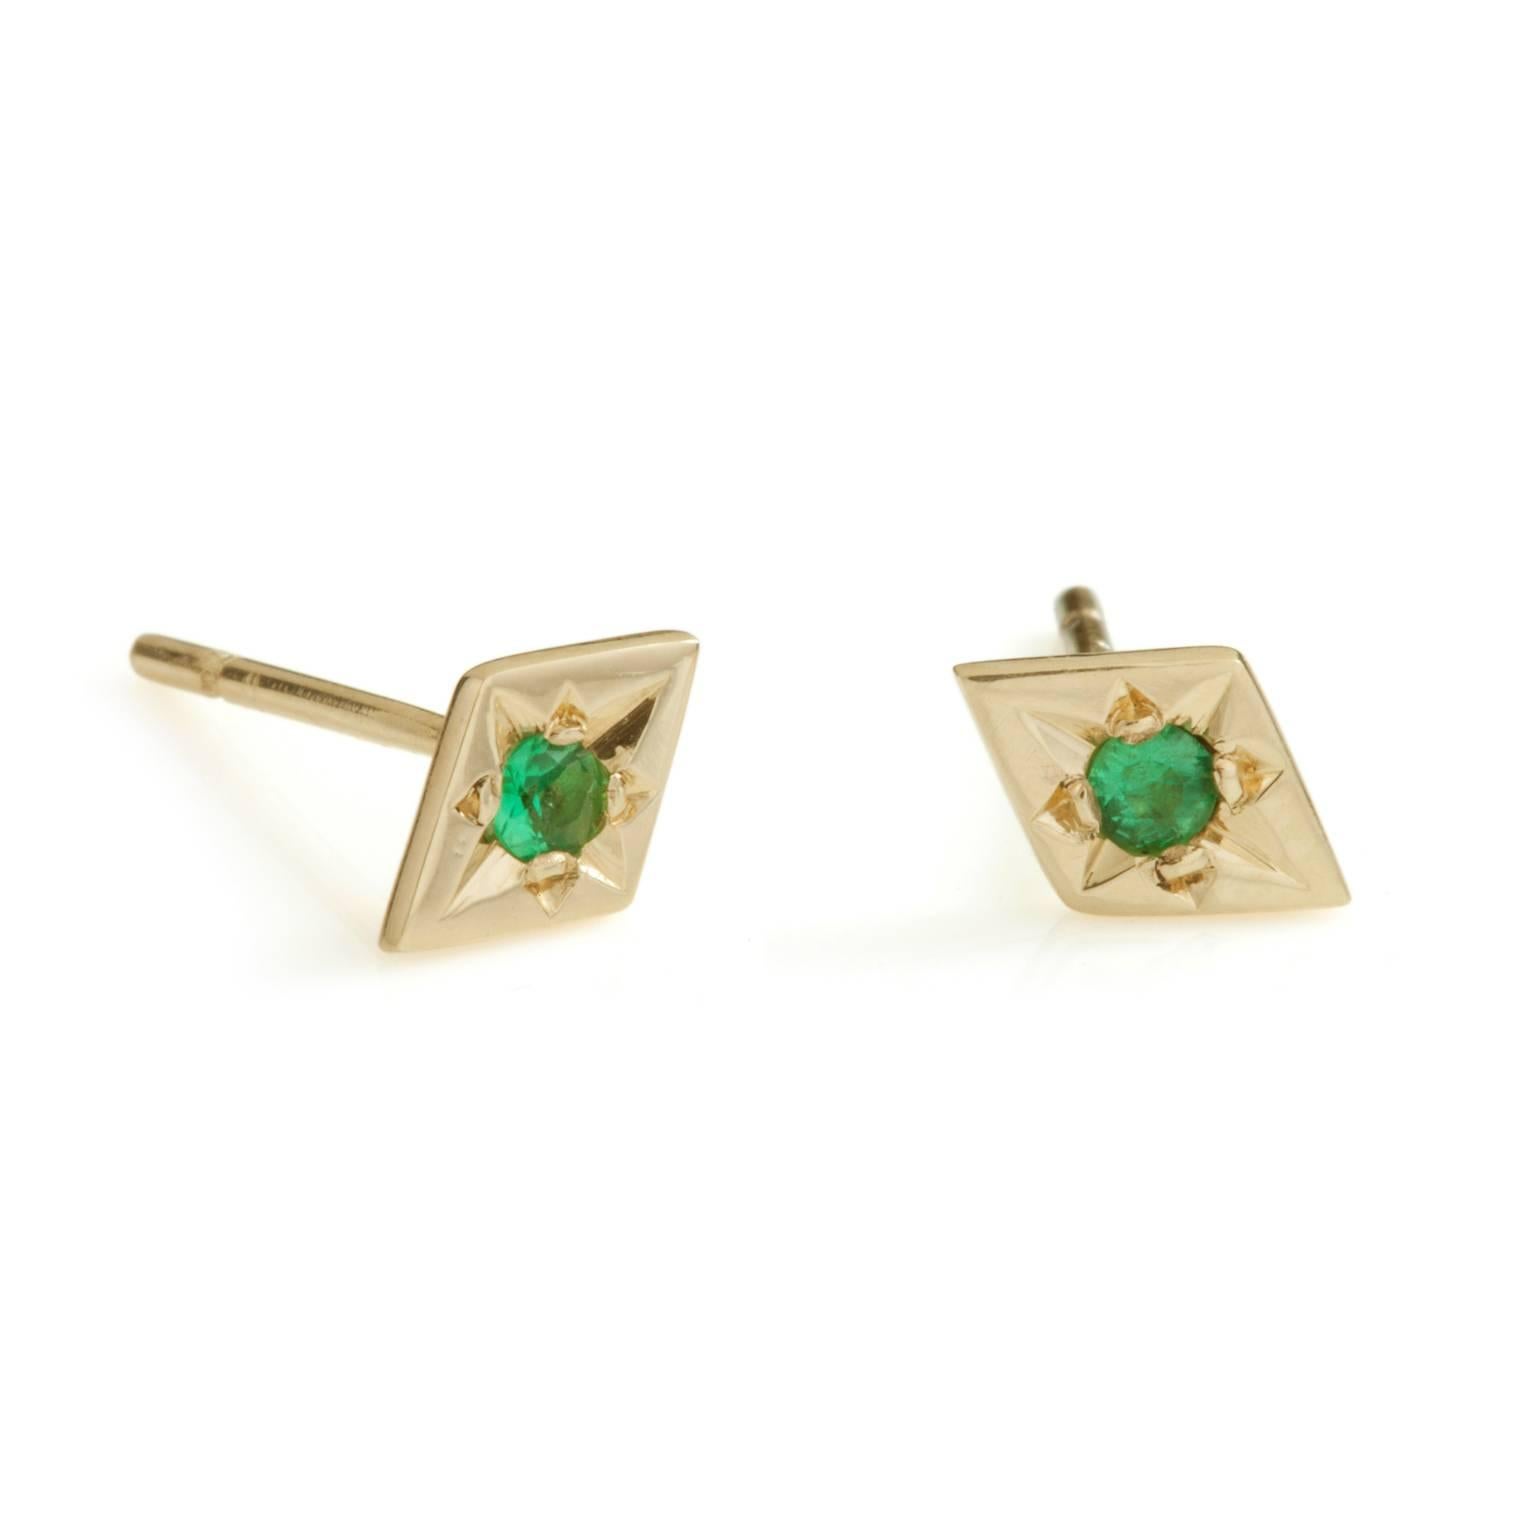 A wonderful alternative to the traditional pair of single stone studs, these earrings are a diamond shape, signature to the Firma collection, star set with diamond cut emeralds, which have a bright pop of colour.